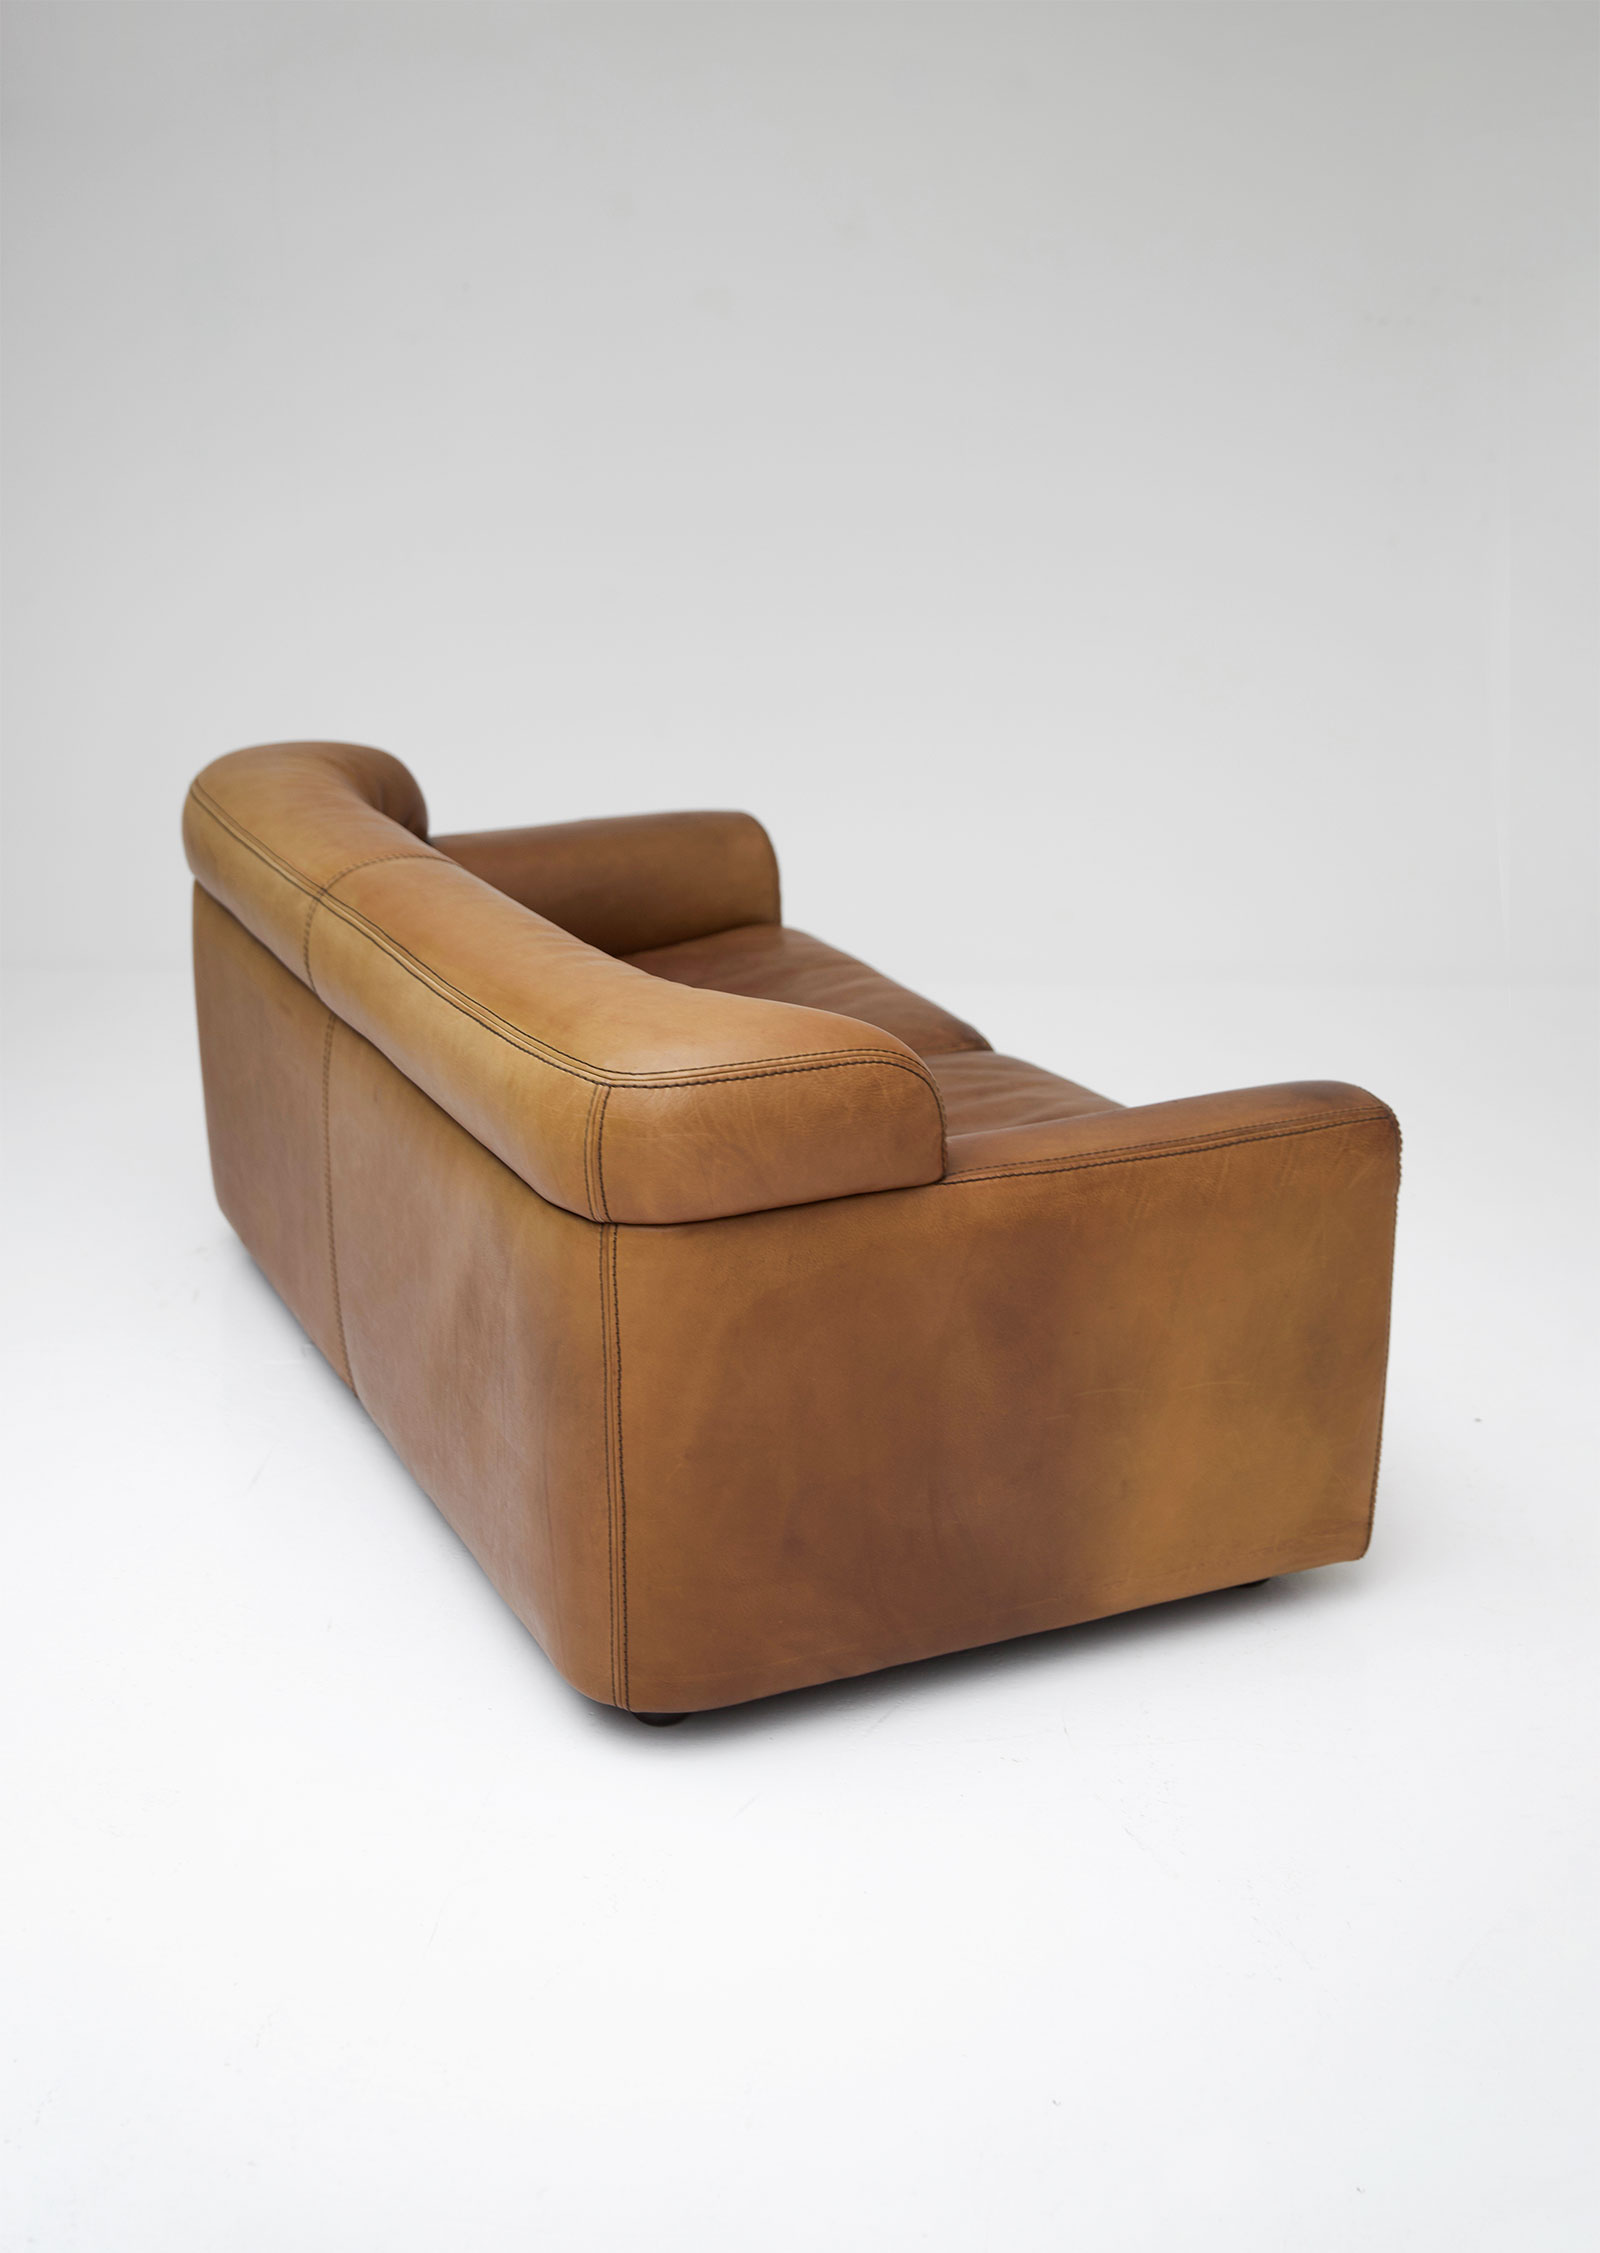 durlet leather two seat sofaimage 4